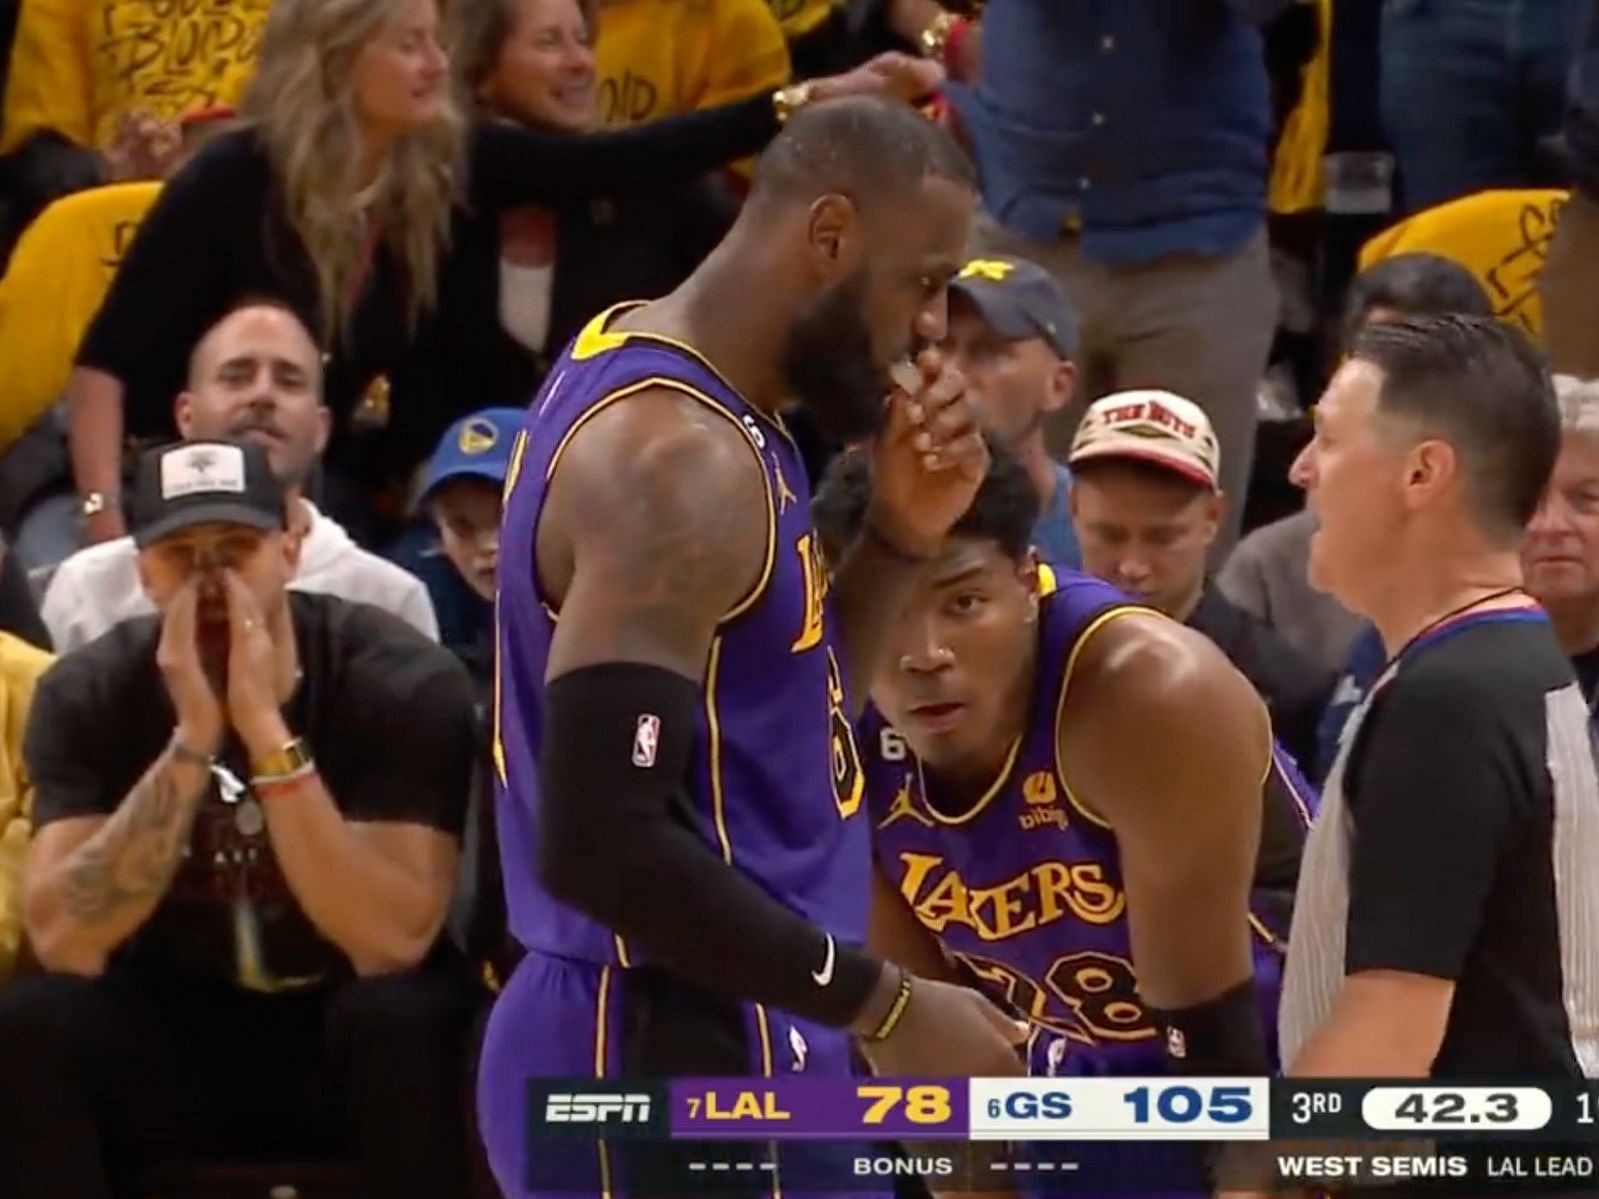 George Kittle boos LeBron James during Lakers-Warriors Game 2 